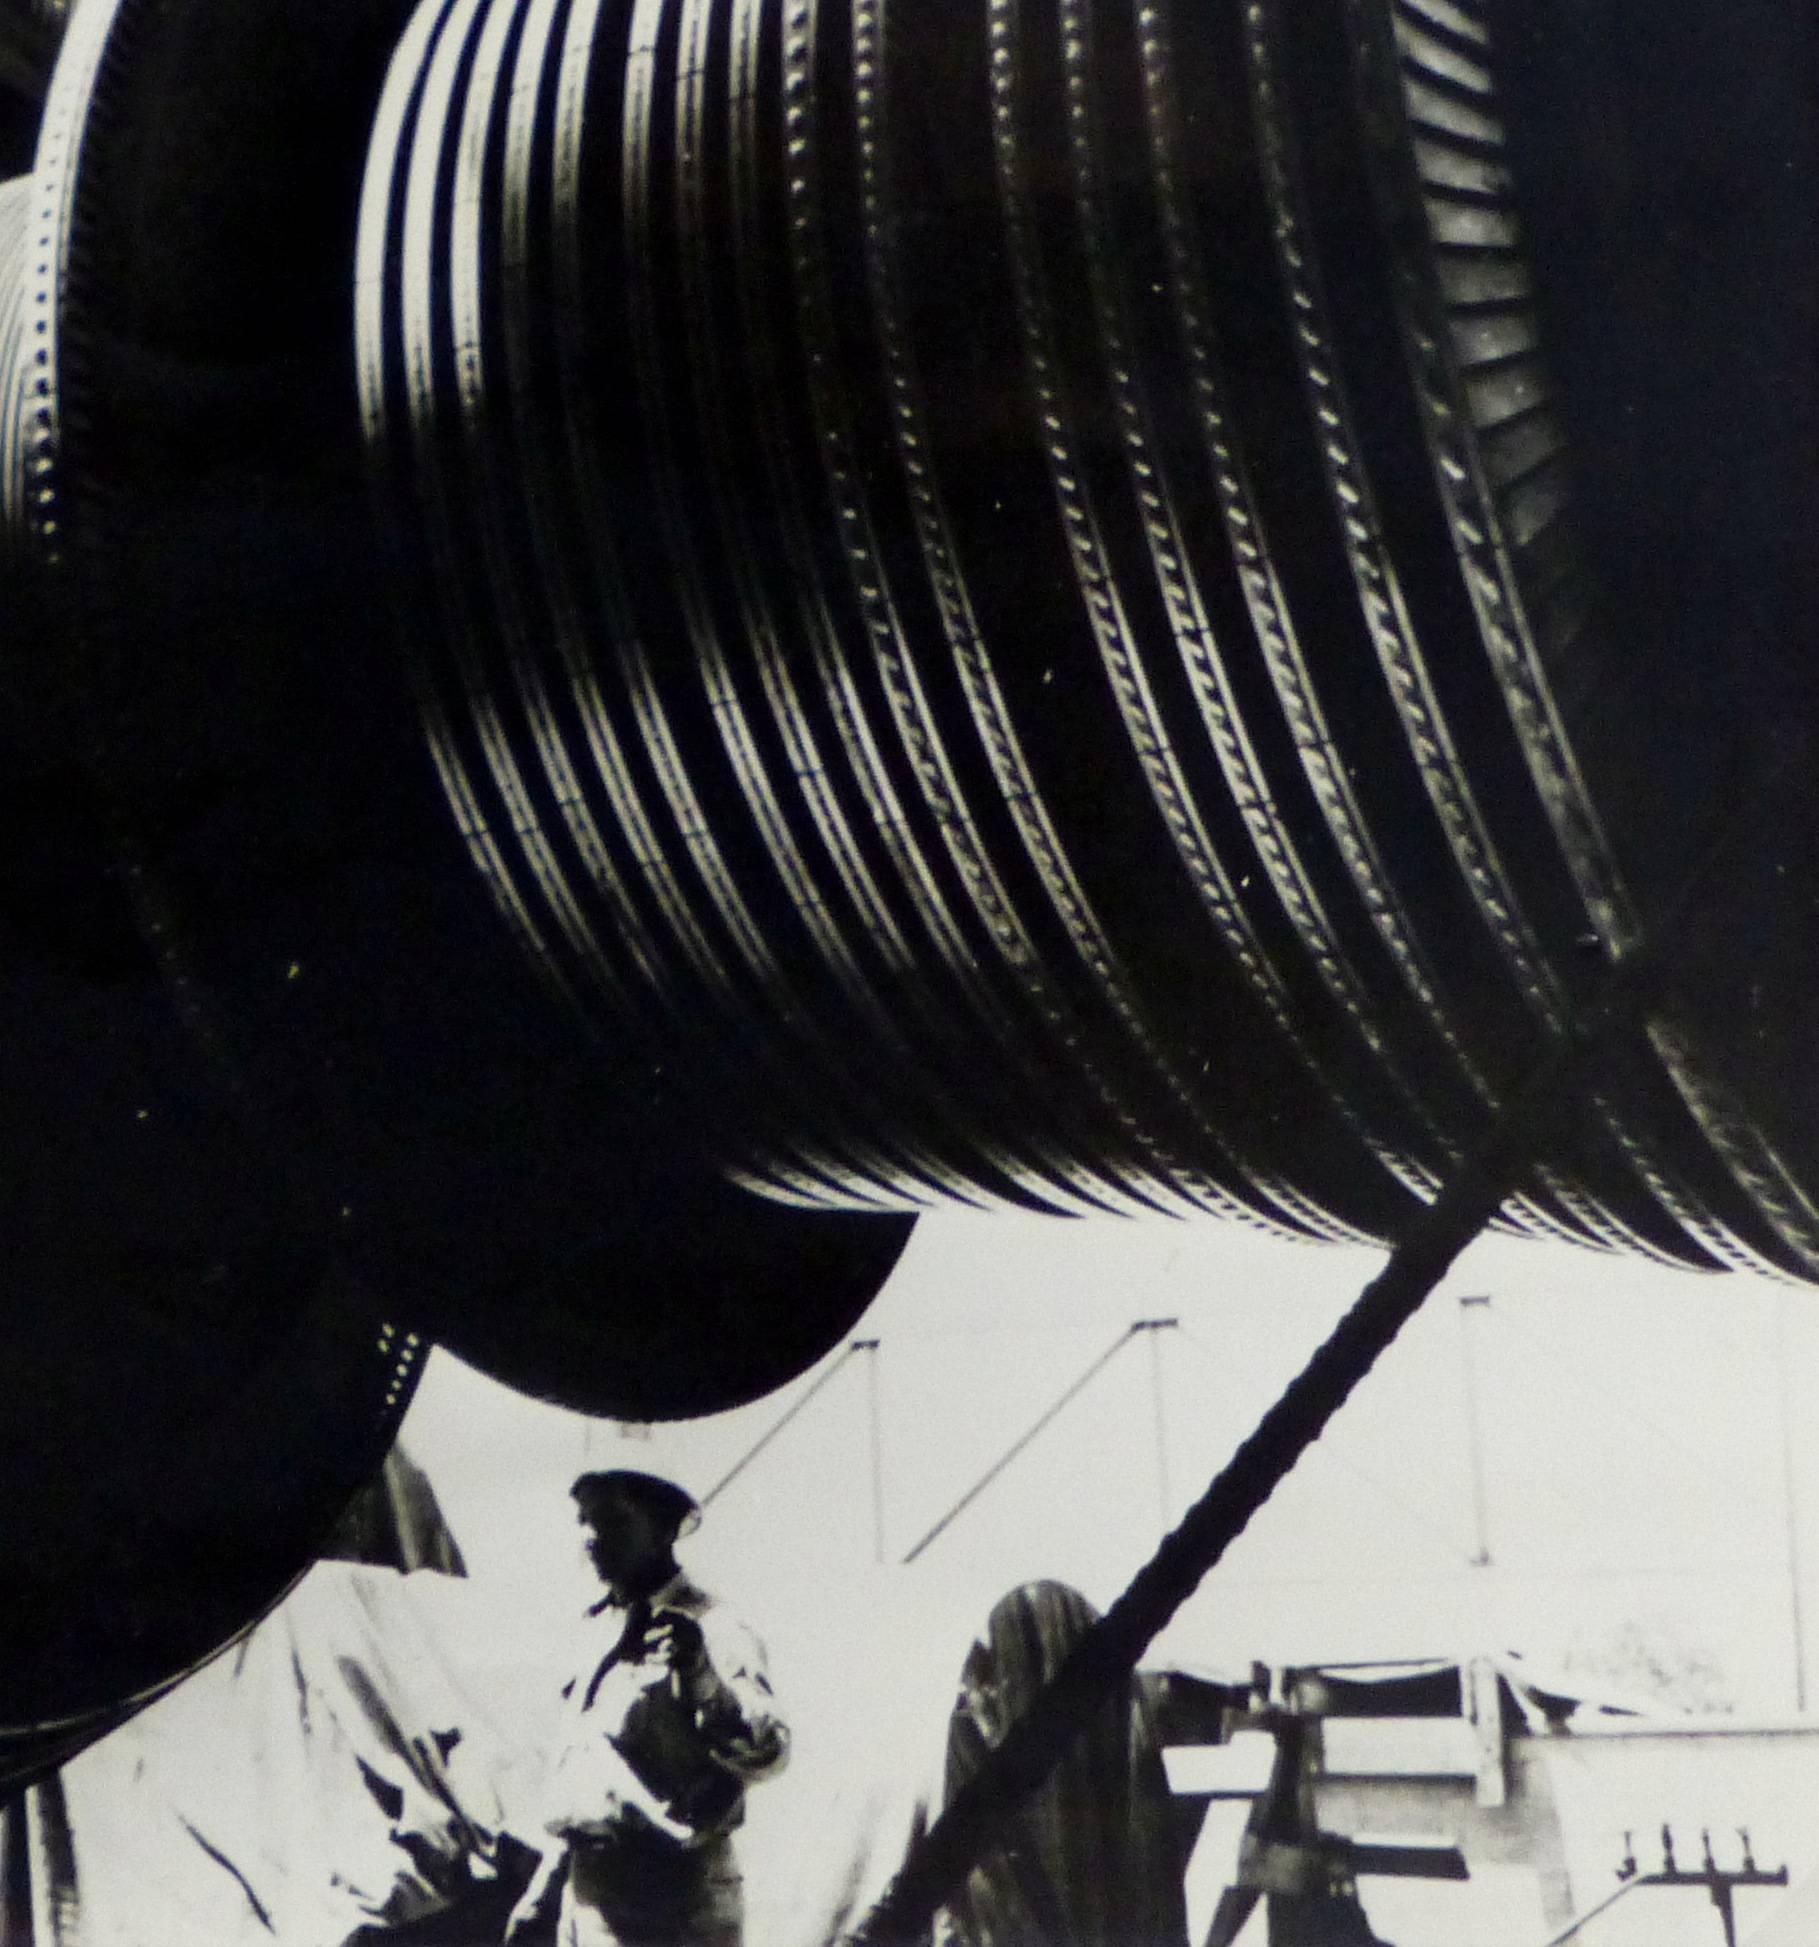 Vintage silver gelatin photograph of a large rocket booster with engineers looking on in the background, circa 1950. 

Original artwork on paper displayed on a white mat with a gold border. Archival plastic sleeve and Certificate of Authenticity